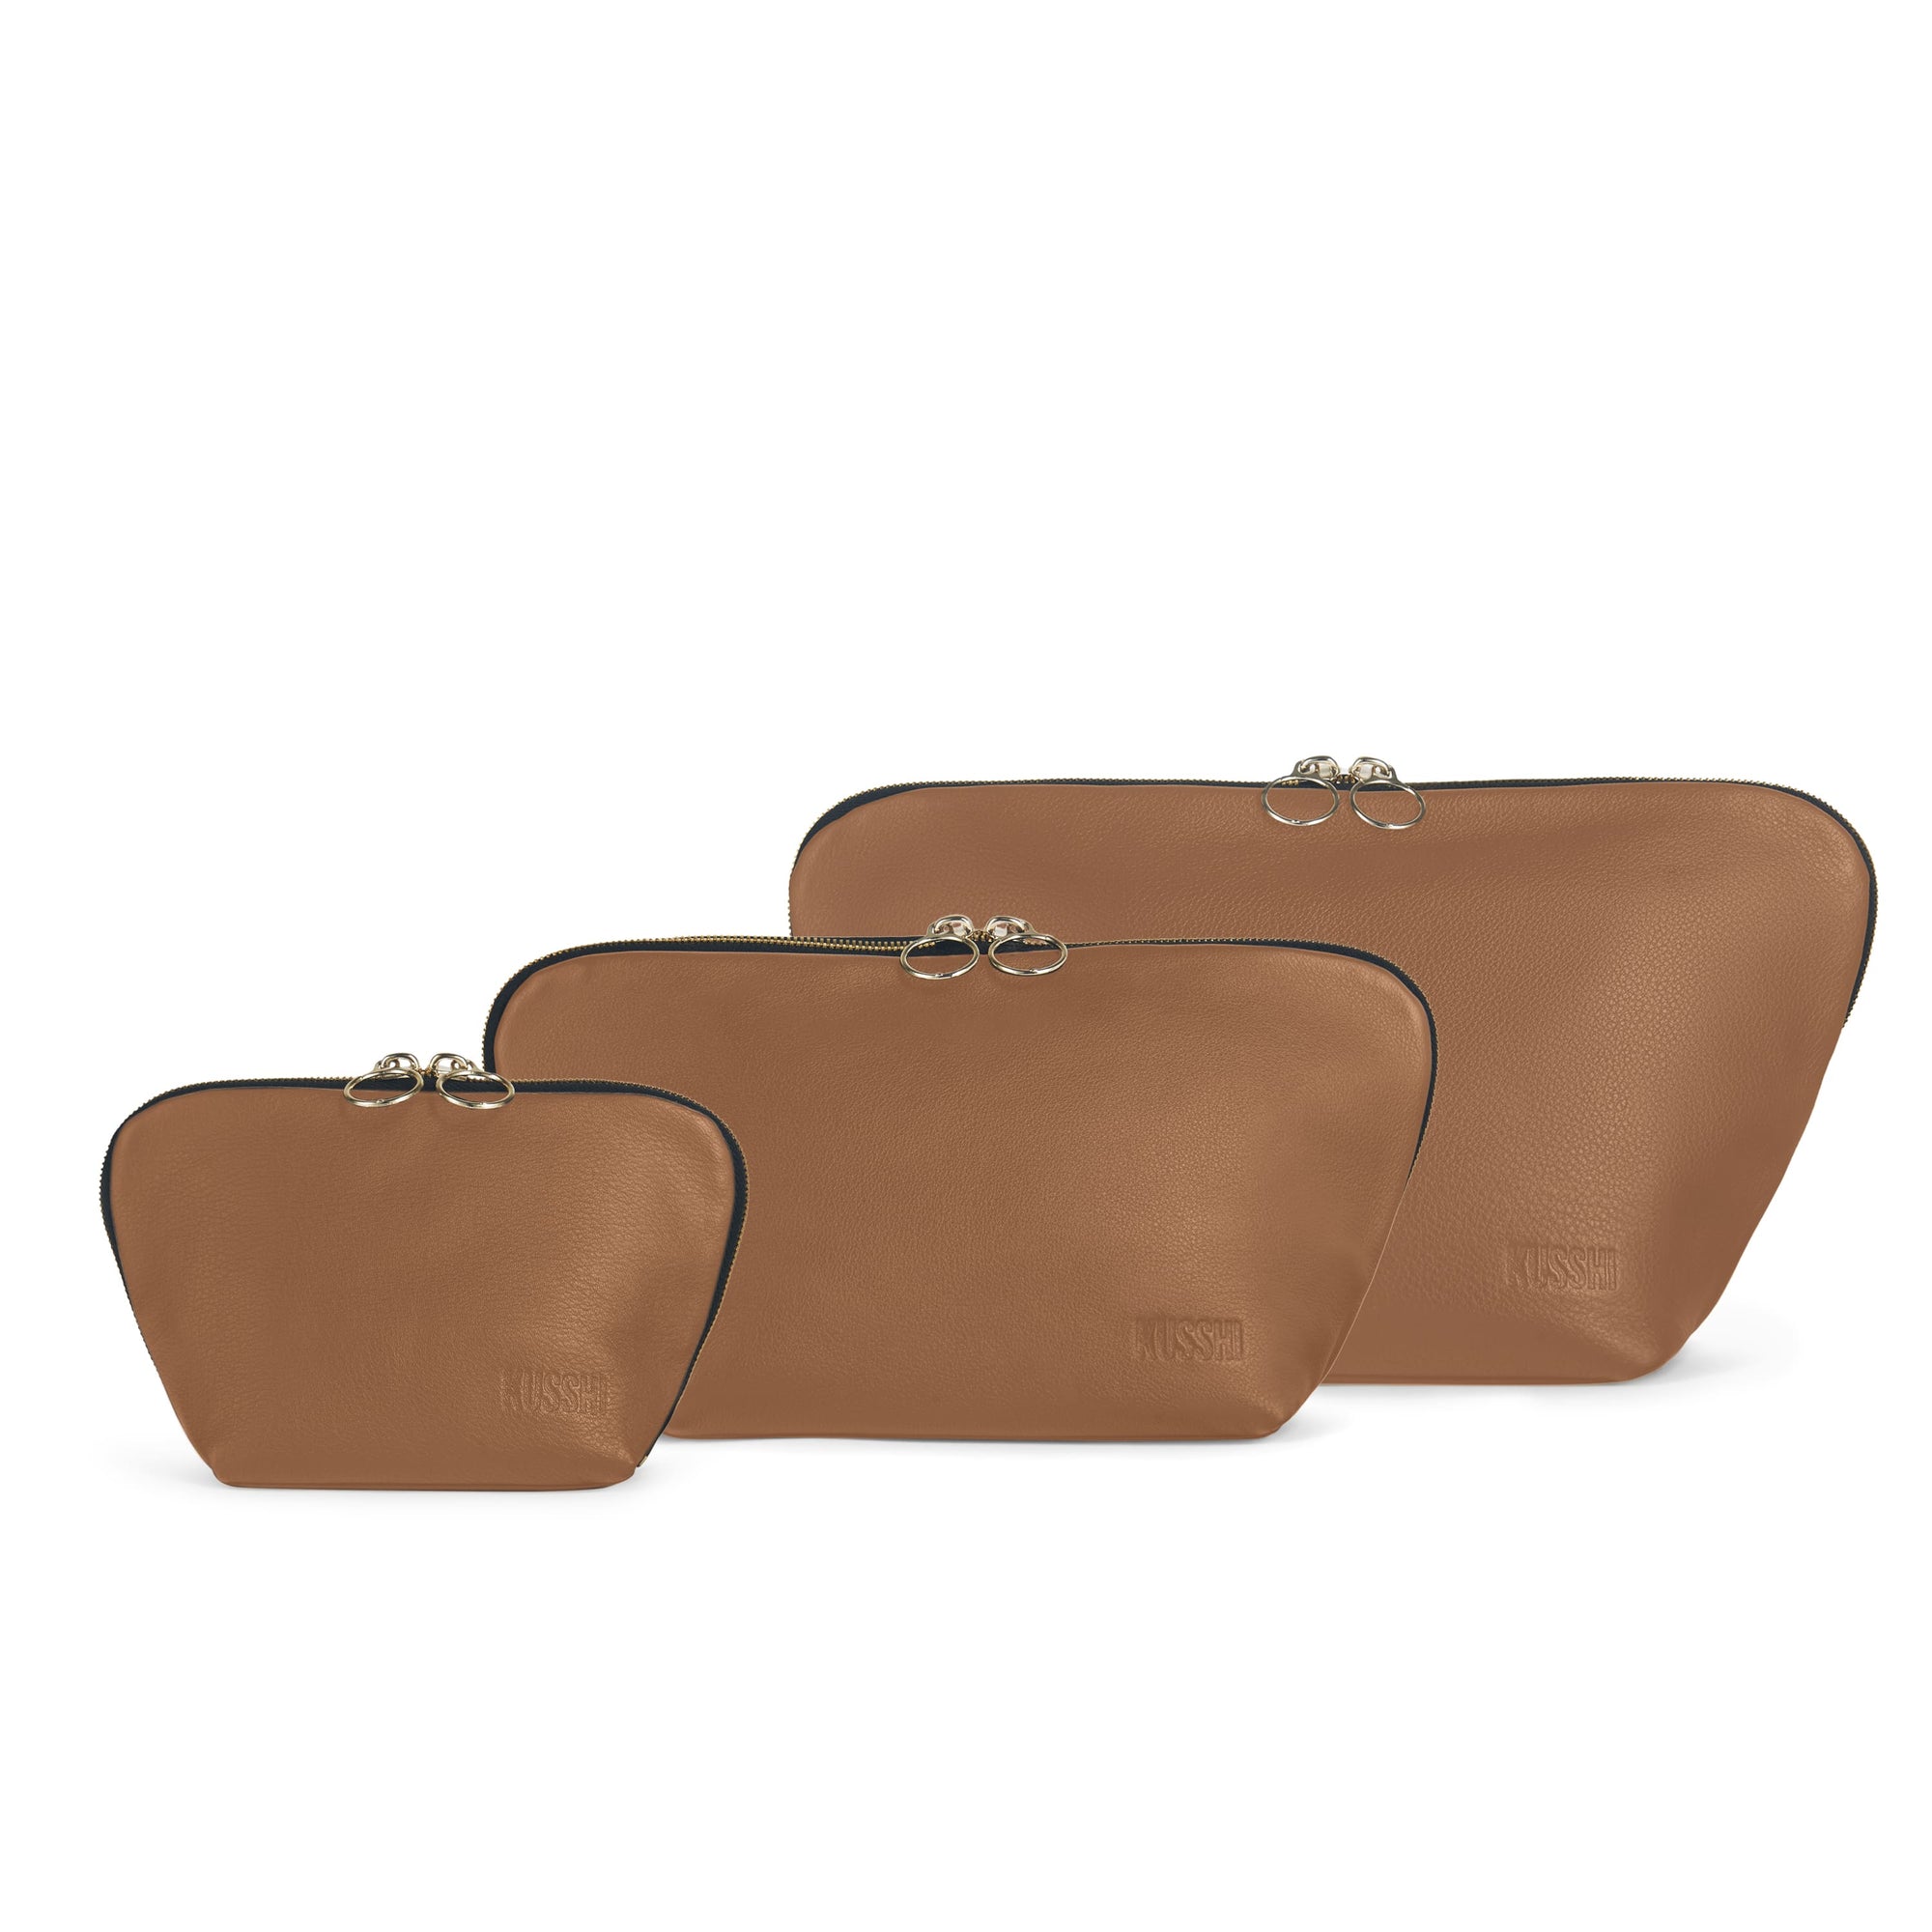 color: Luxurious Camel Leather with Red Interior; alt: The Complete KUSSHI Set Makeup Bag | KUSSHI